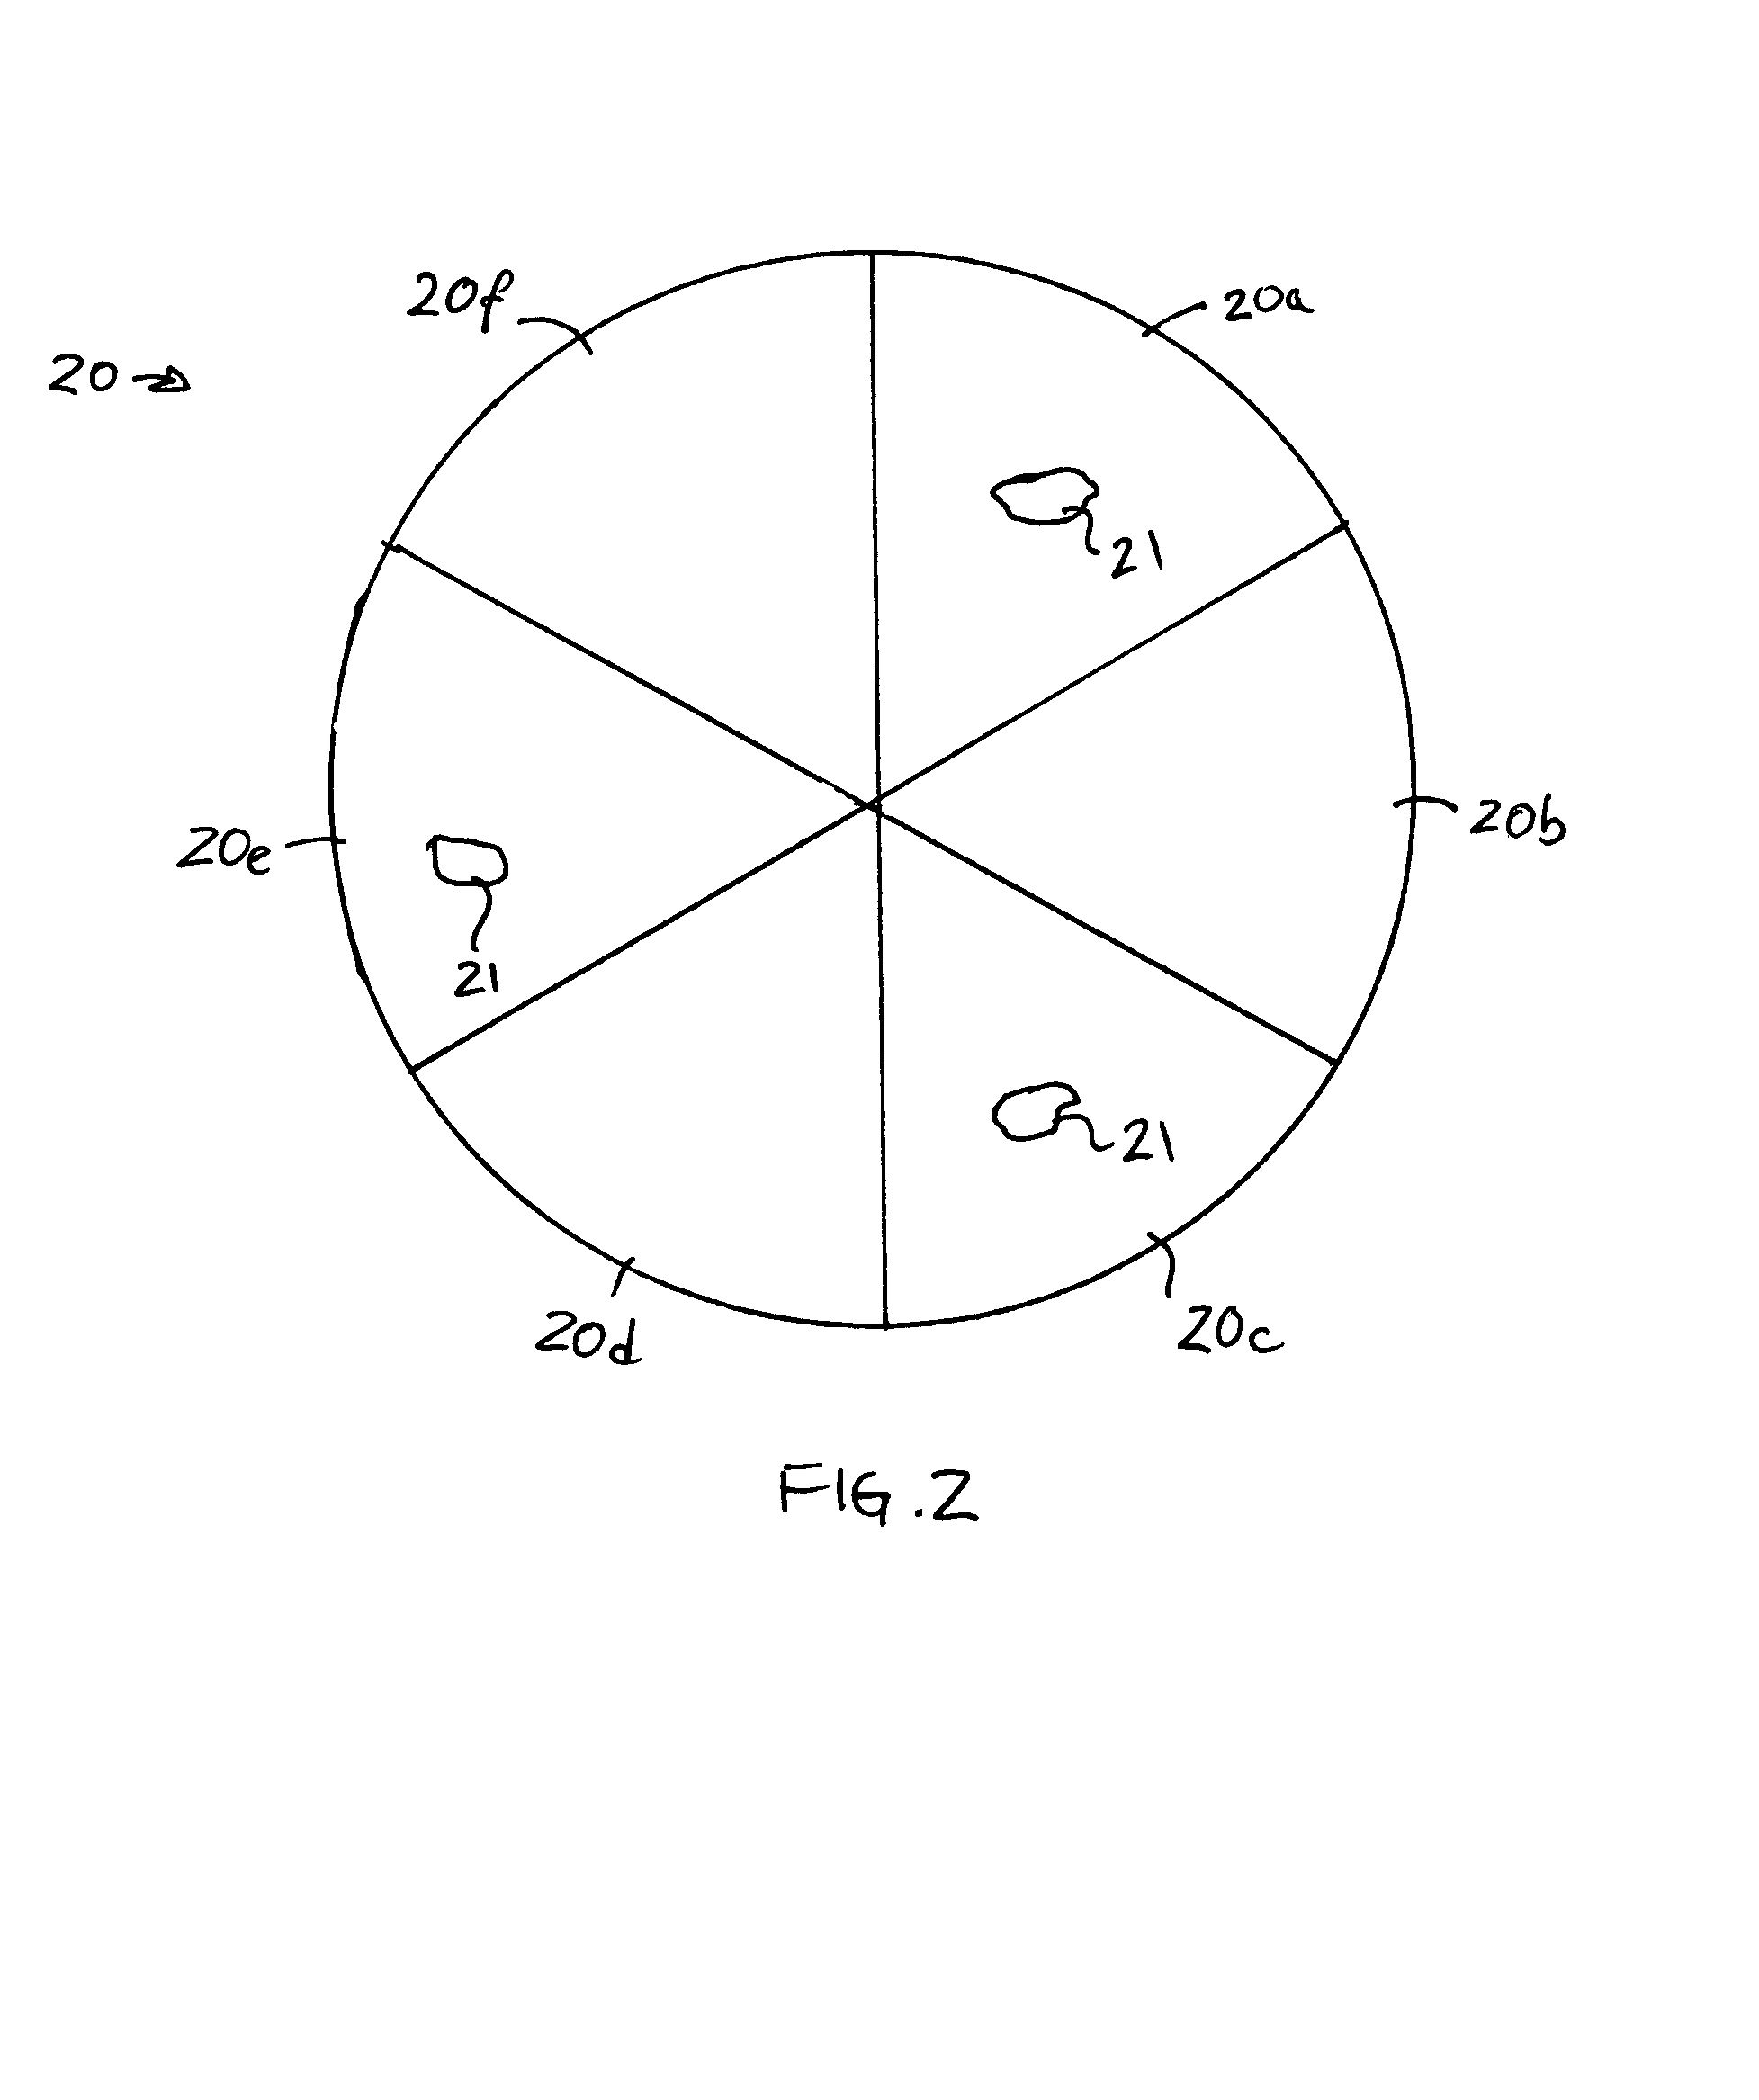 Method and apparatus for controlling access to storage media